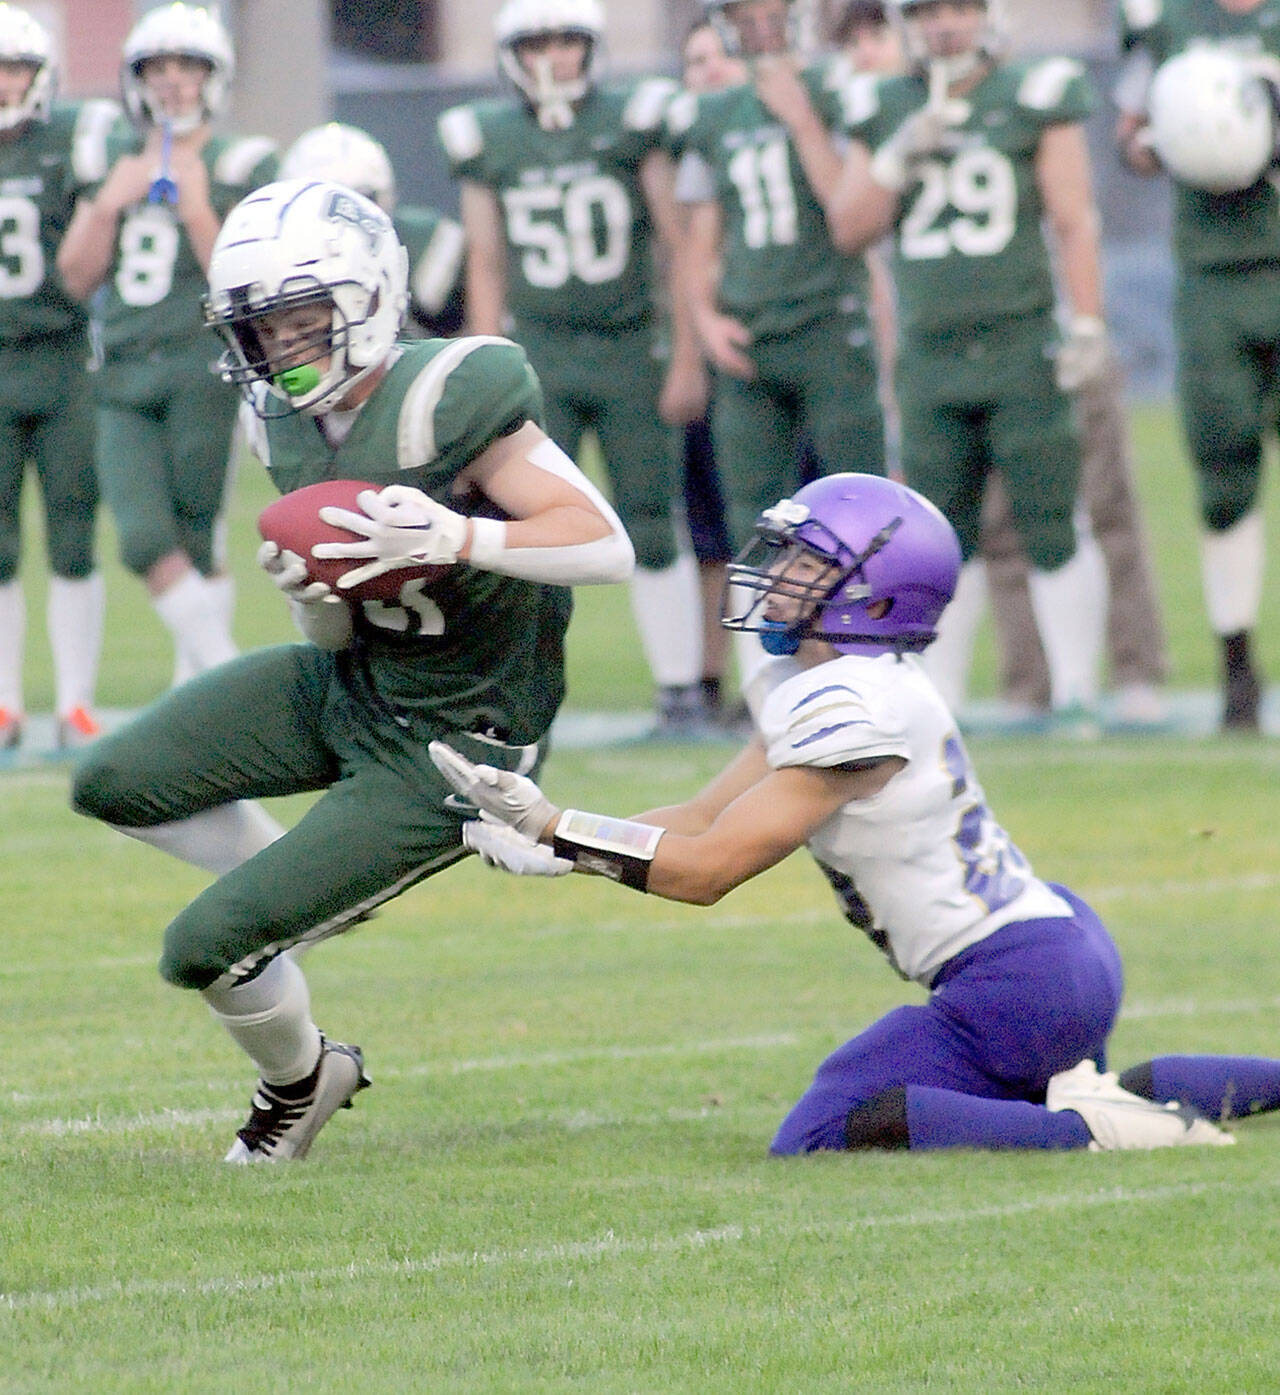 KEITH THORPE/PENINSULA DAILY NEWS Port Angeles’ Tanner Jacobsen intercepts a pass intended for Sequim’s Toppy Robideau Jr. during Friday’s game in Port Angeles.